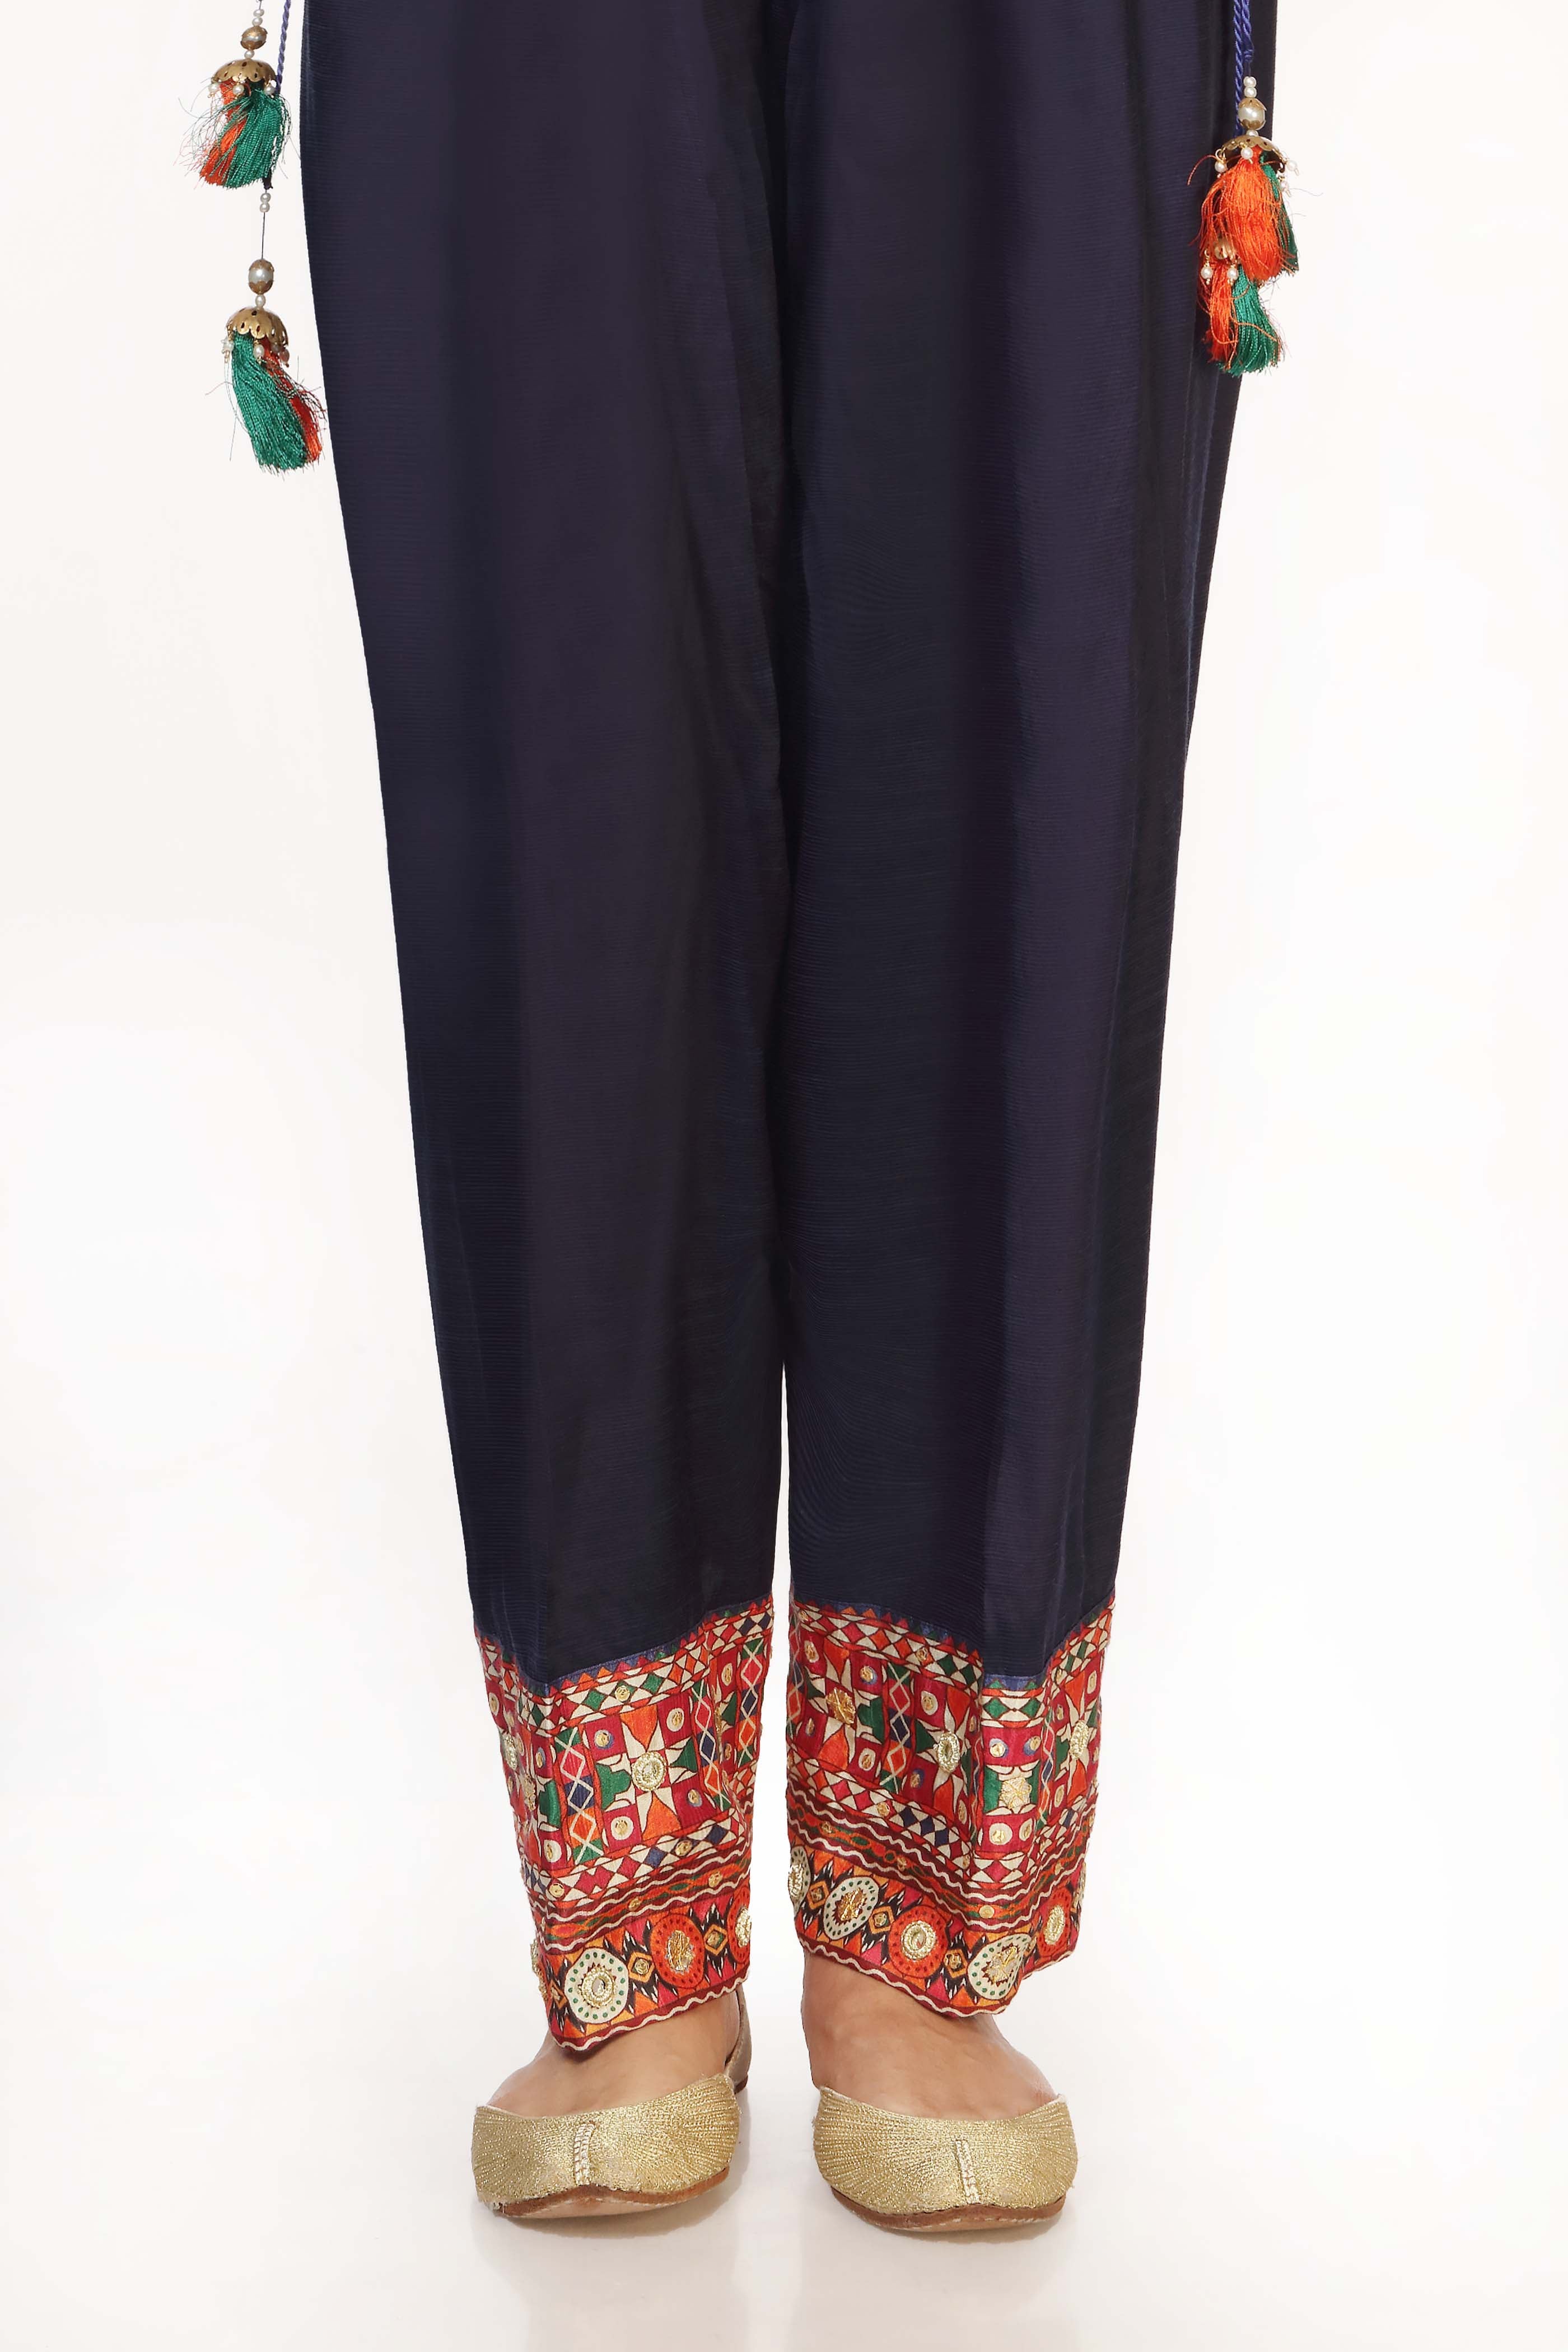 Square Shalwar in Navy Blue coloured Printed Lawn fabric